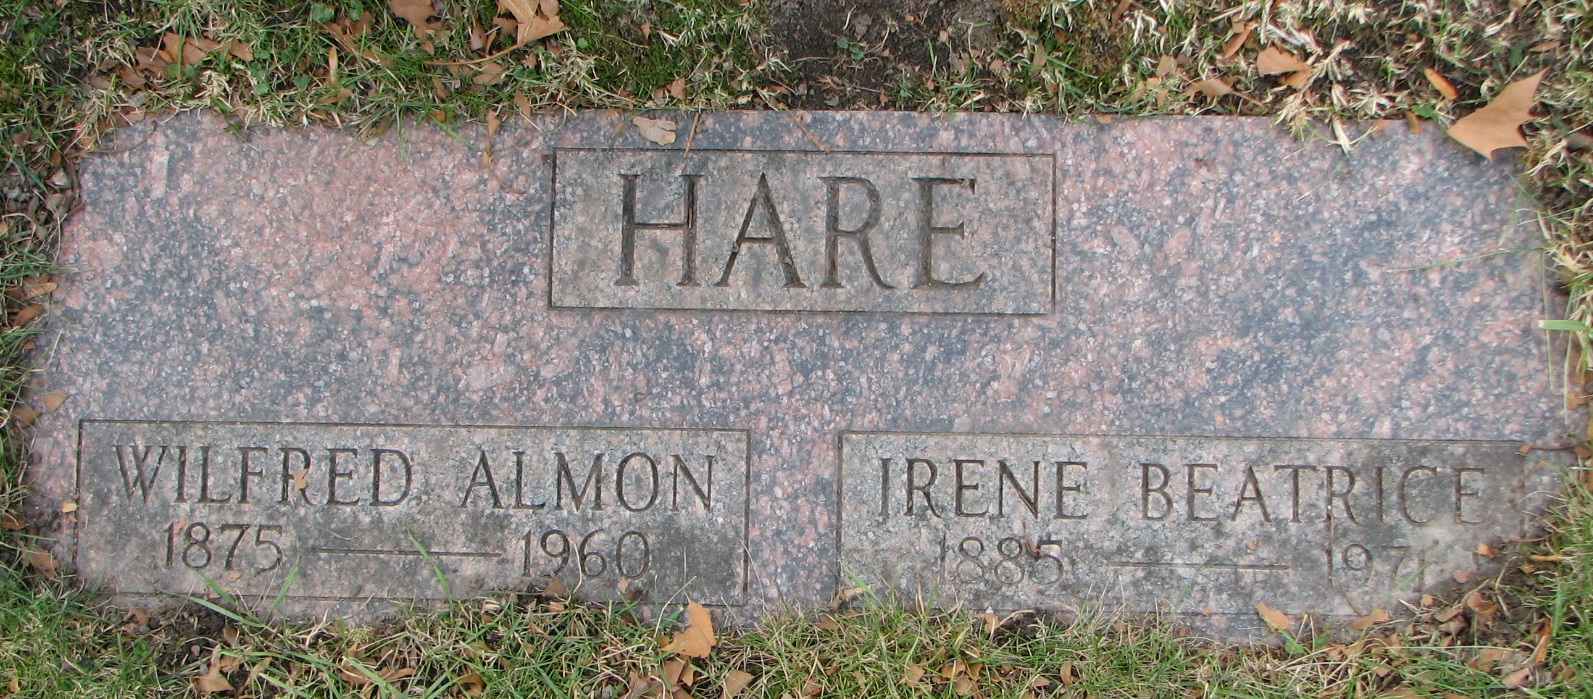 HARE-Wilfred-Almon-1875-1960_Irene-Beatrice 1885-1971 SMACW Cemetery